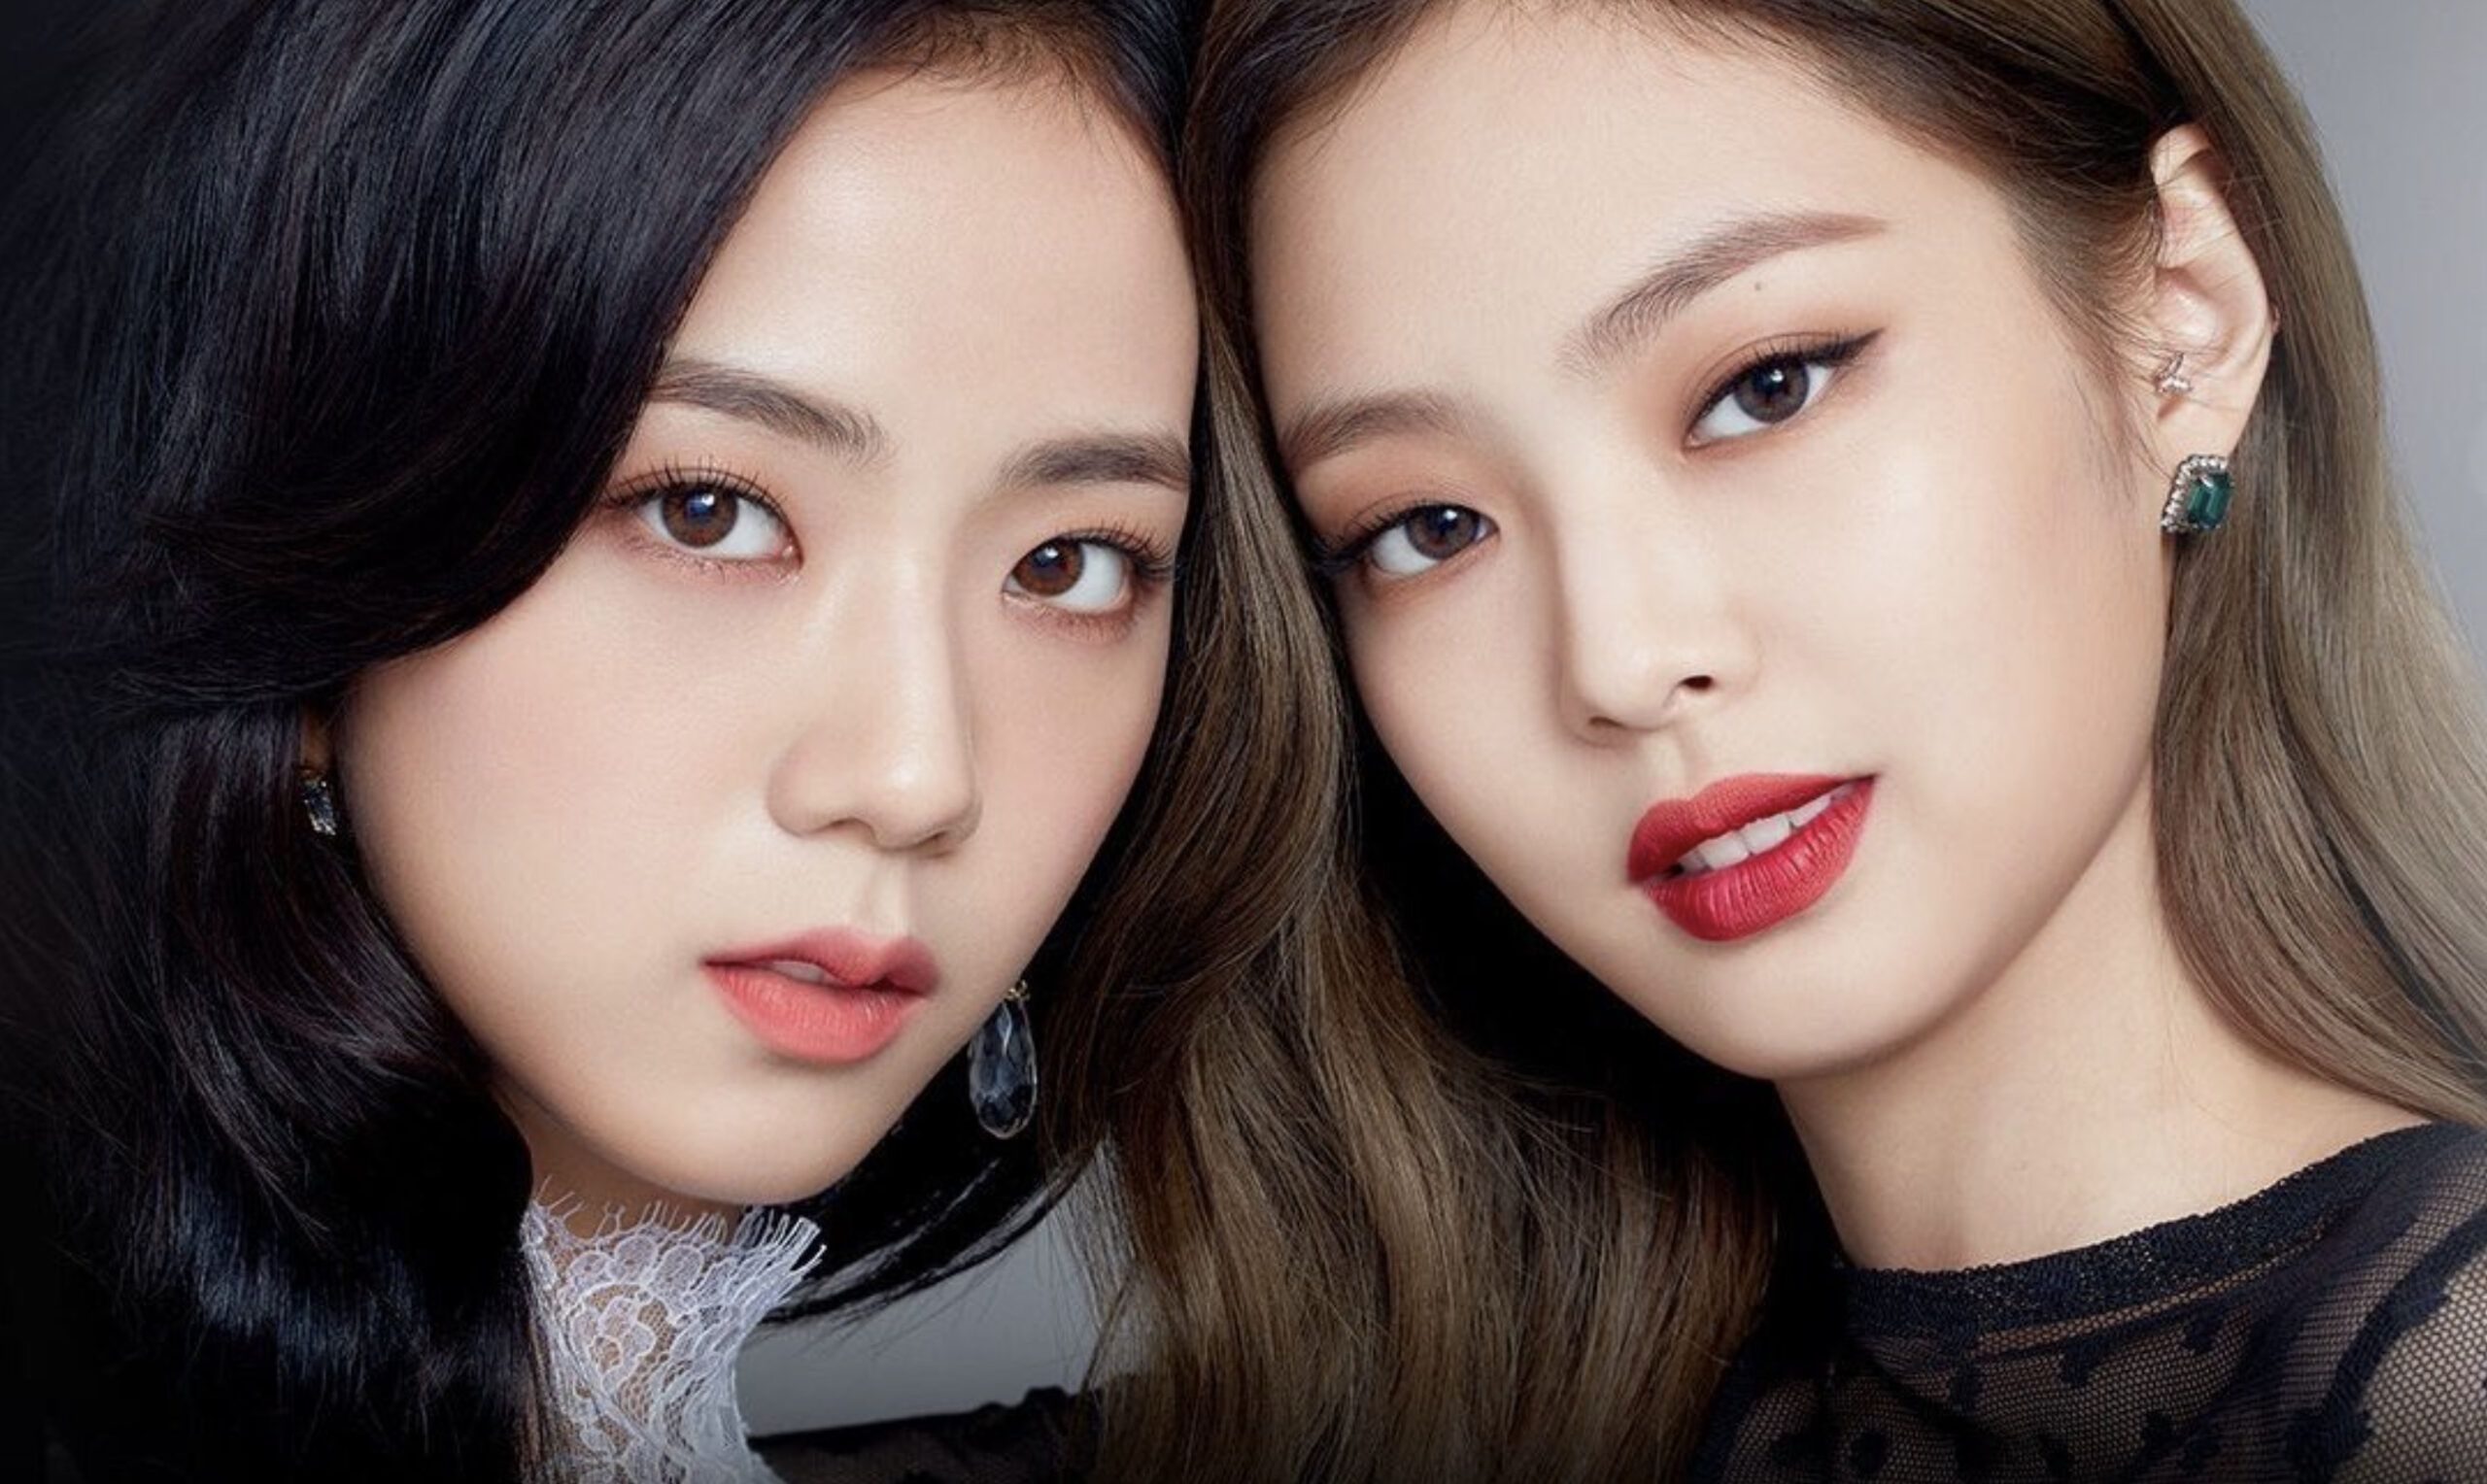 K-pop’s famous girls Jisoo and Jennie have always shown fans how to look pr...